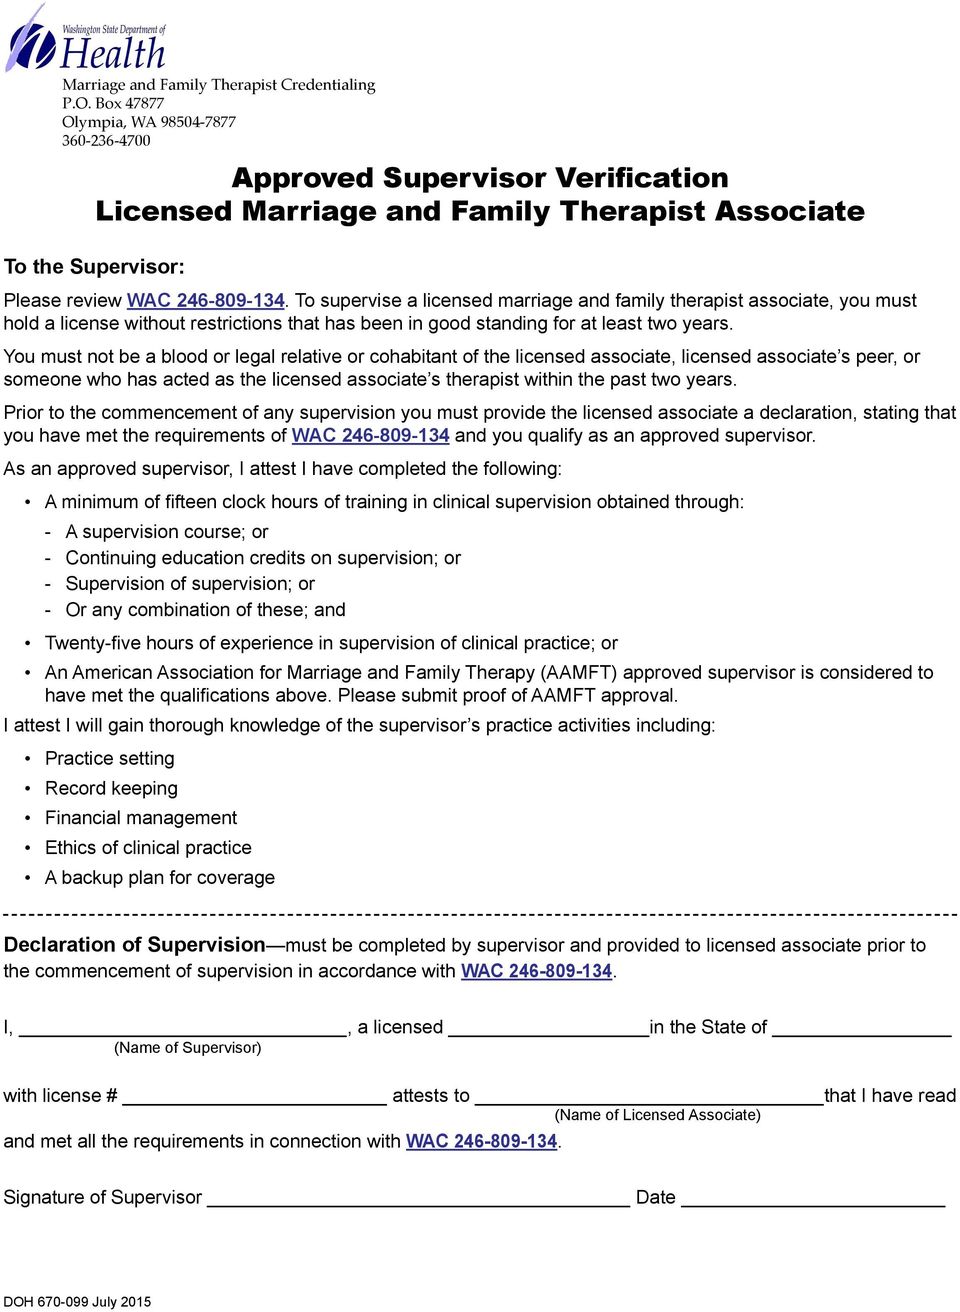 To supervise a licensed marriage and family therapist associate, you must hold a license without restrictions that has been in good standing for at least two years.